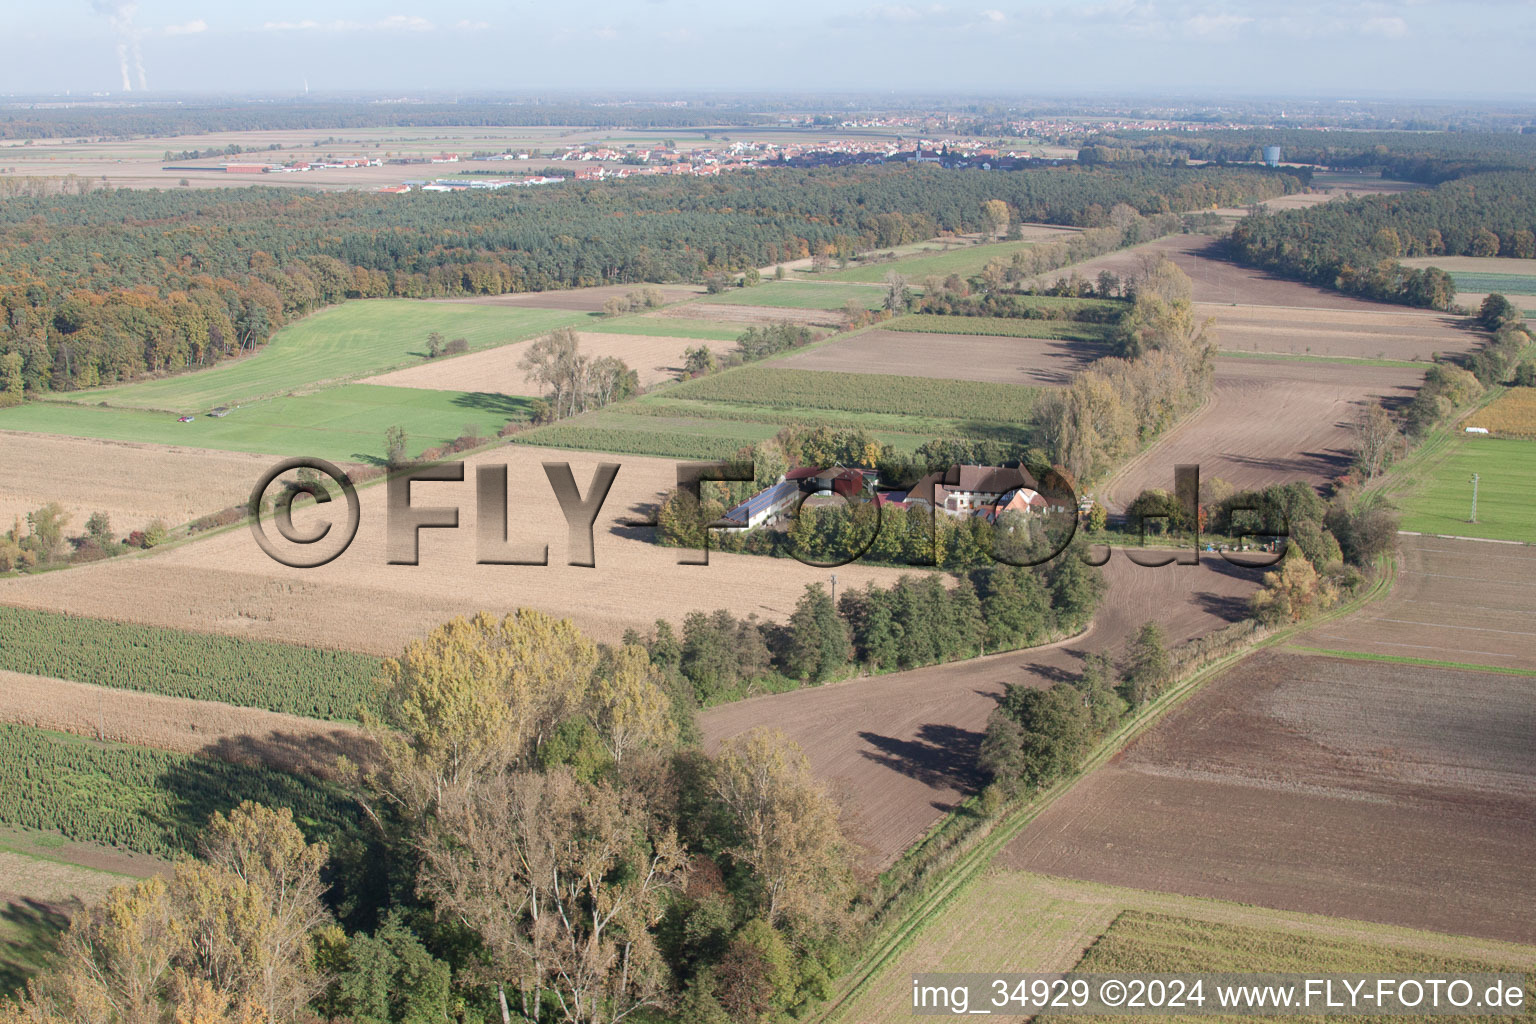 Aerial photograpy of Ledge mill in Erlenbach bei Kandel in the state Rhineland-Palatinate, Germany